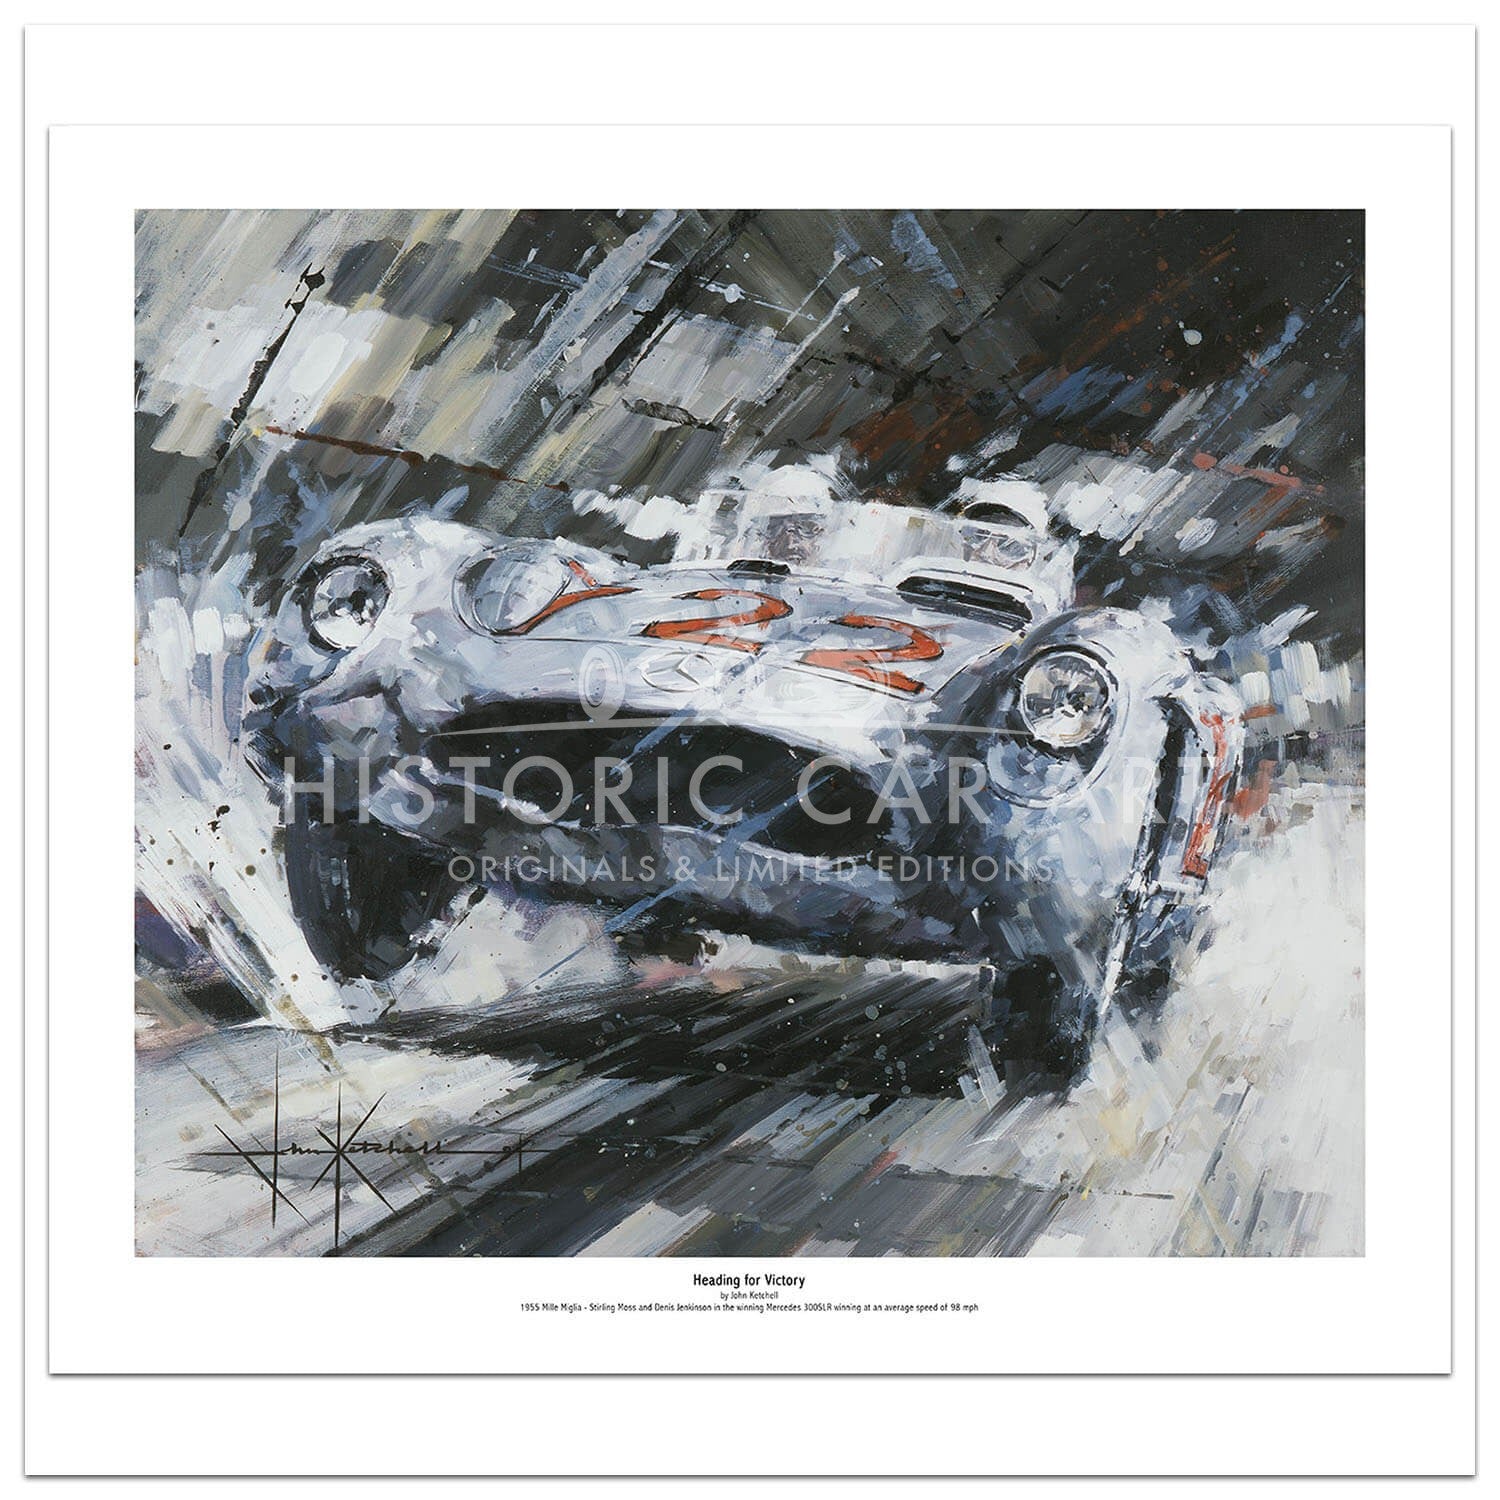 Heading for Victory | Stirling Moss | Mille Miglia 1955 | Mercedes-Benz | Print